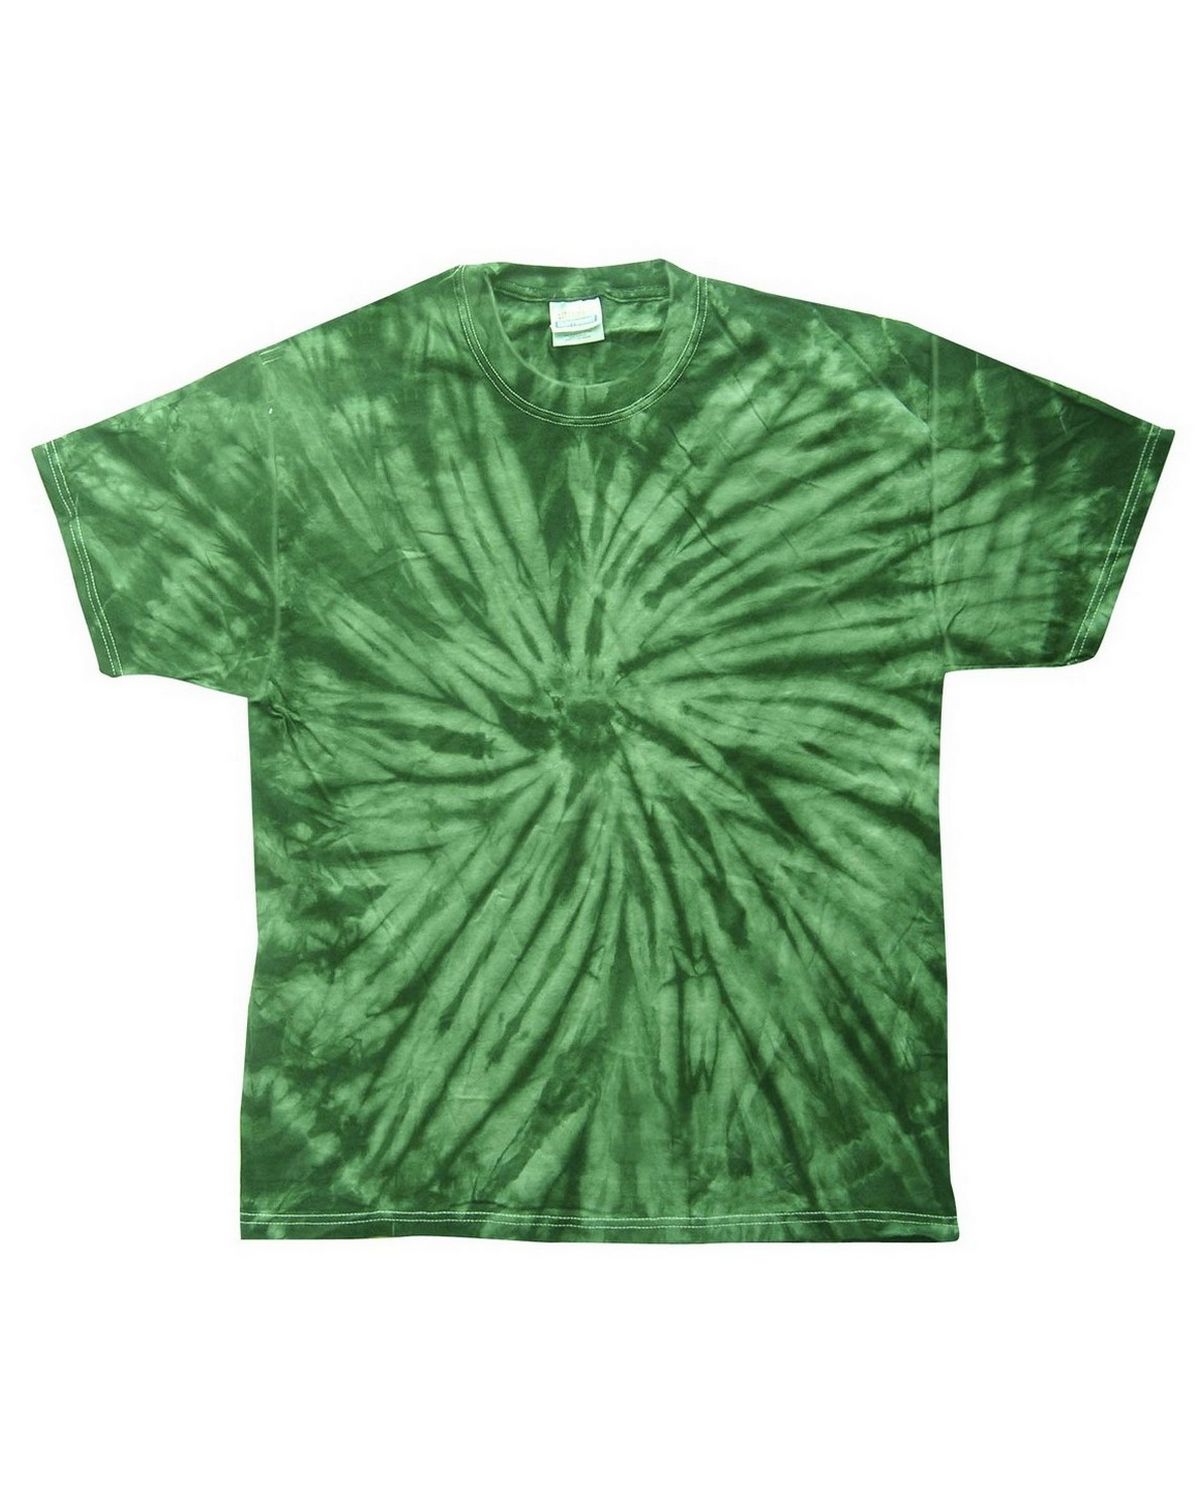 Tie-Dye HS1000 Adult Spider Cotton Tee - ApparelnBags.com